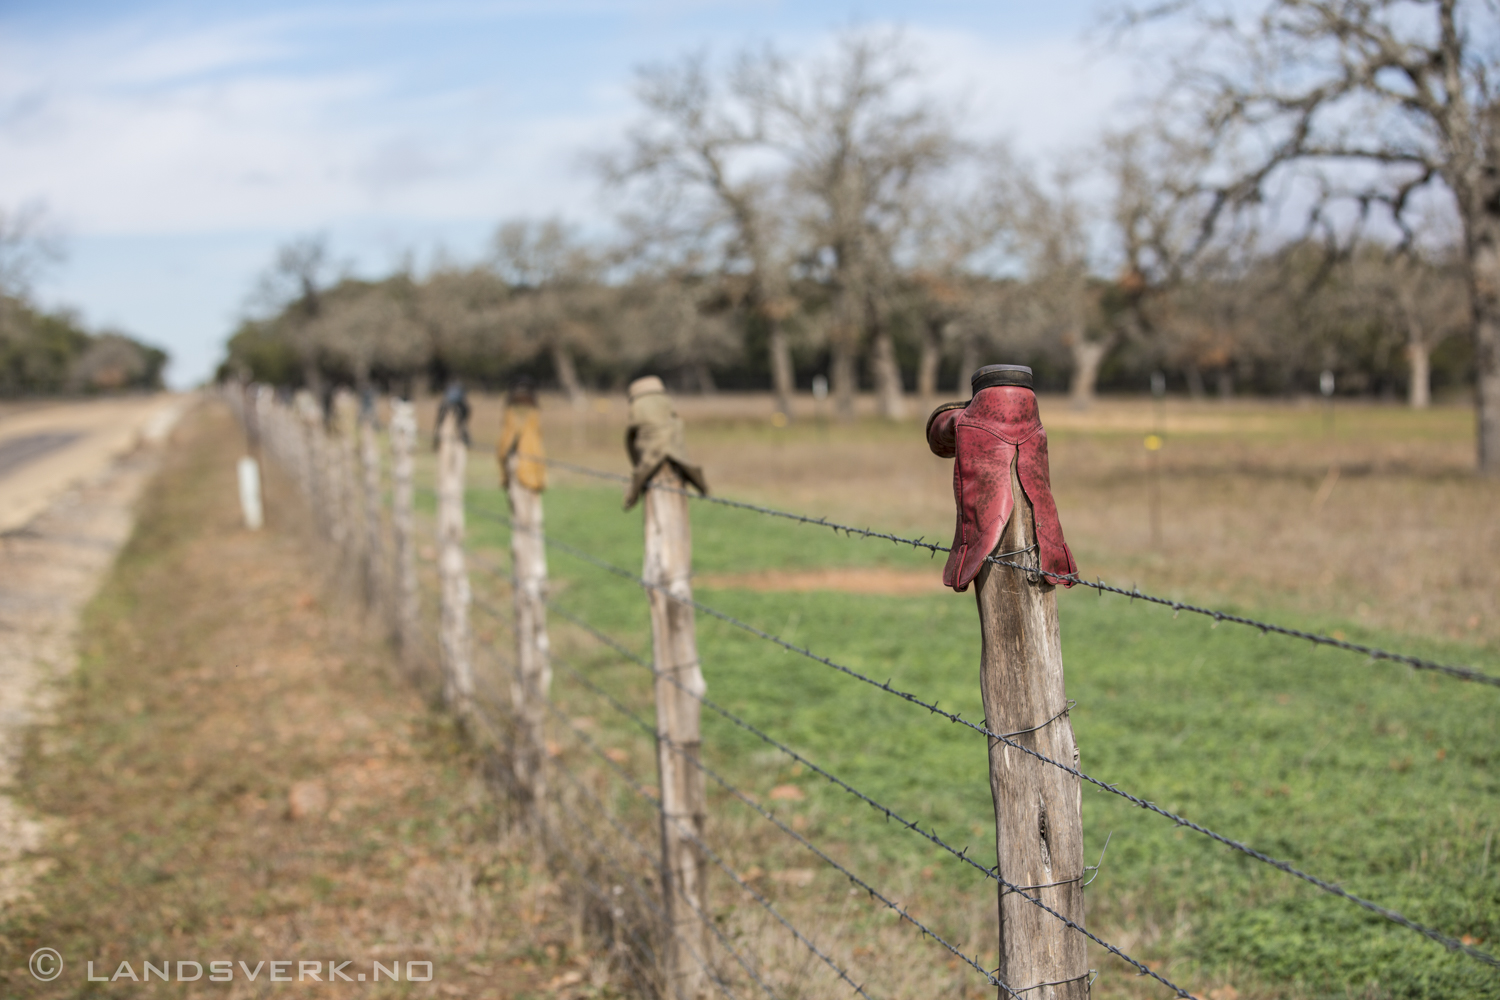 Texas Hill Country. 

(Canon EOS 5D Mark III / Canon EF 70-200mm f/2.8 L IS II USM)